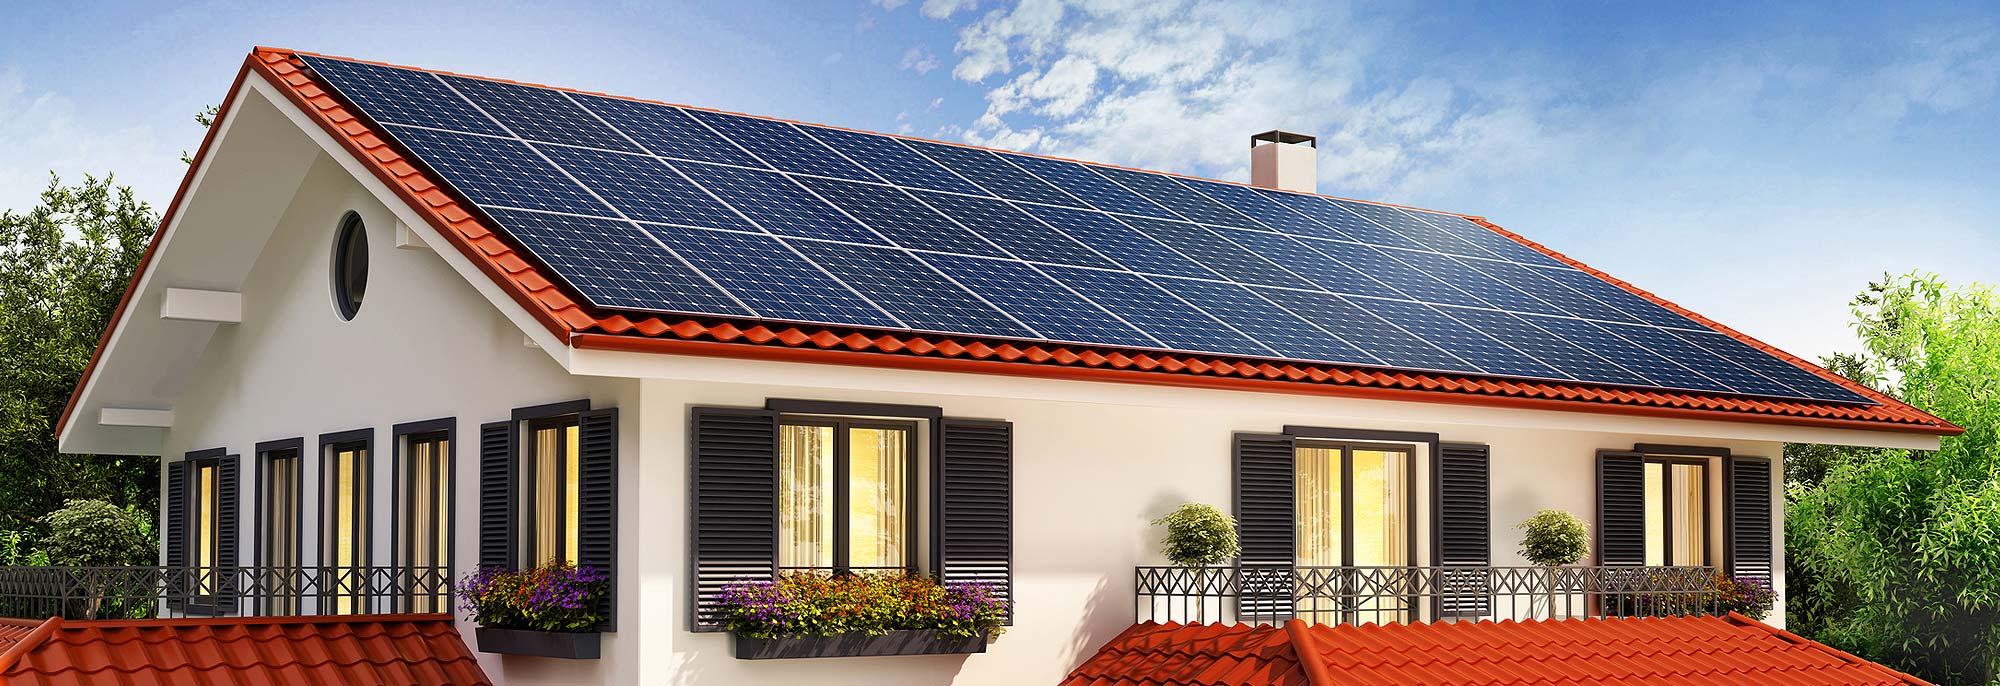 Benefits of using a commercial solar system Brisbane and new way to save money